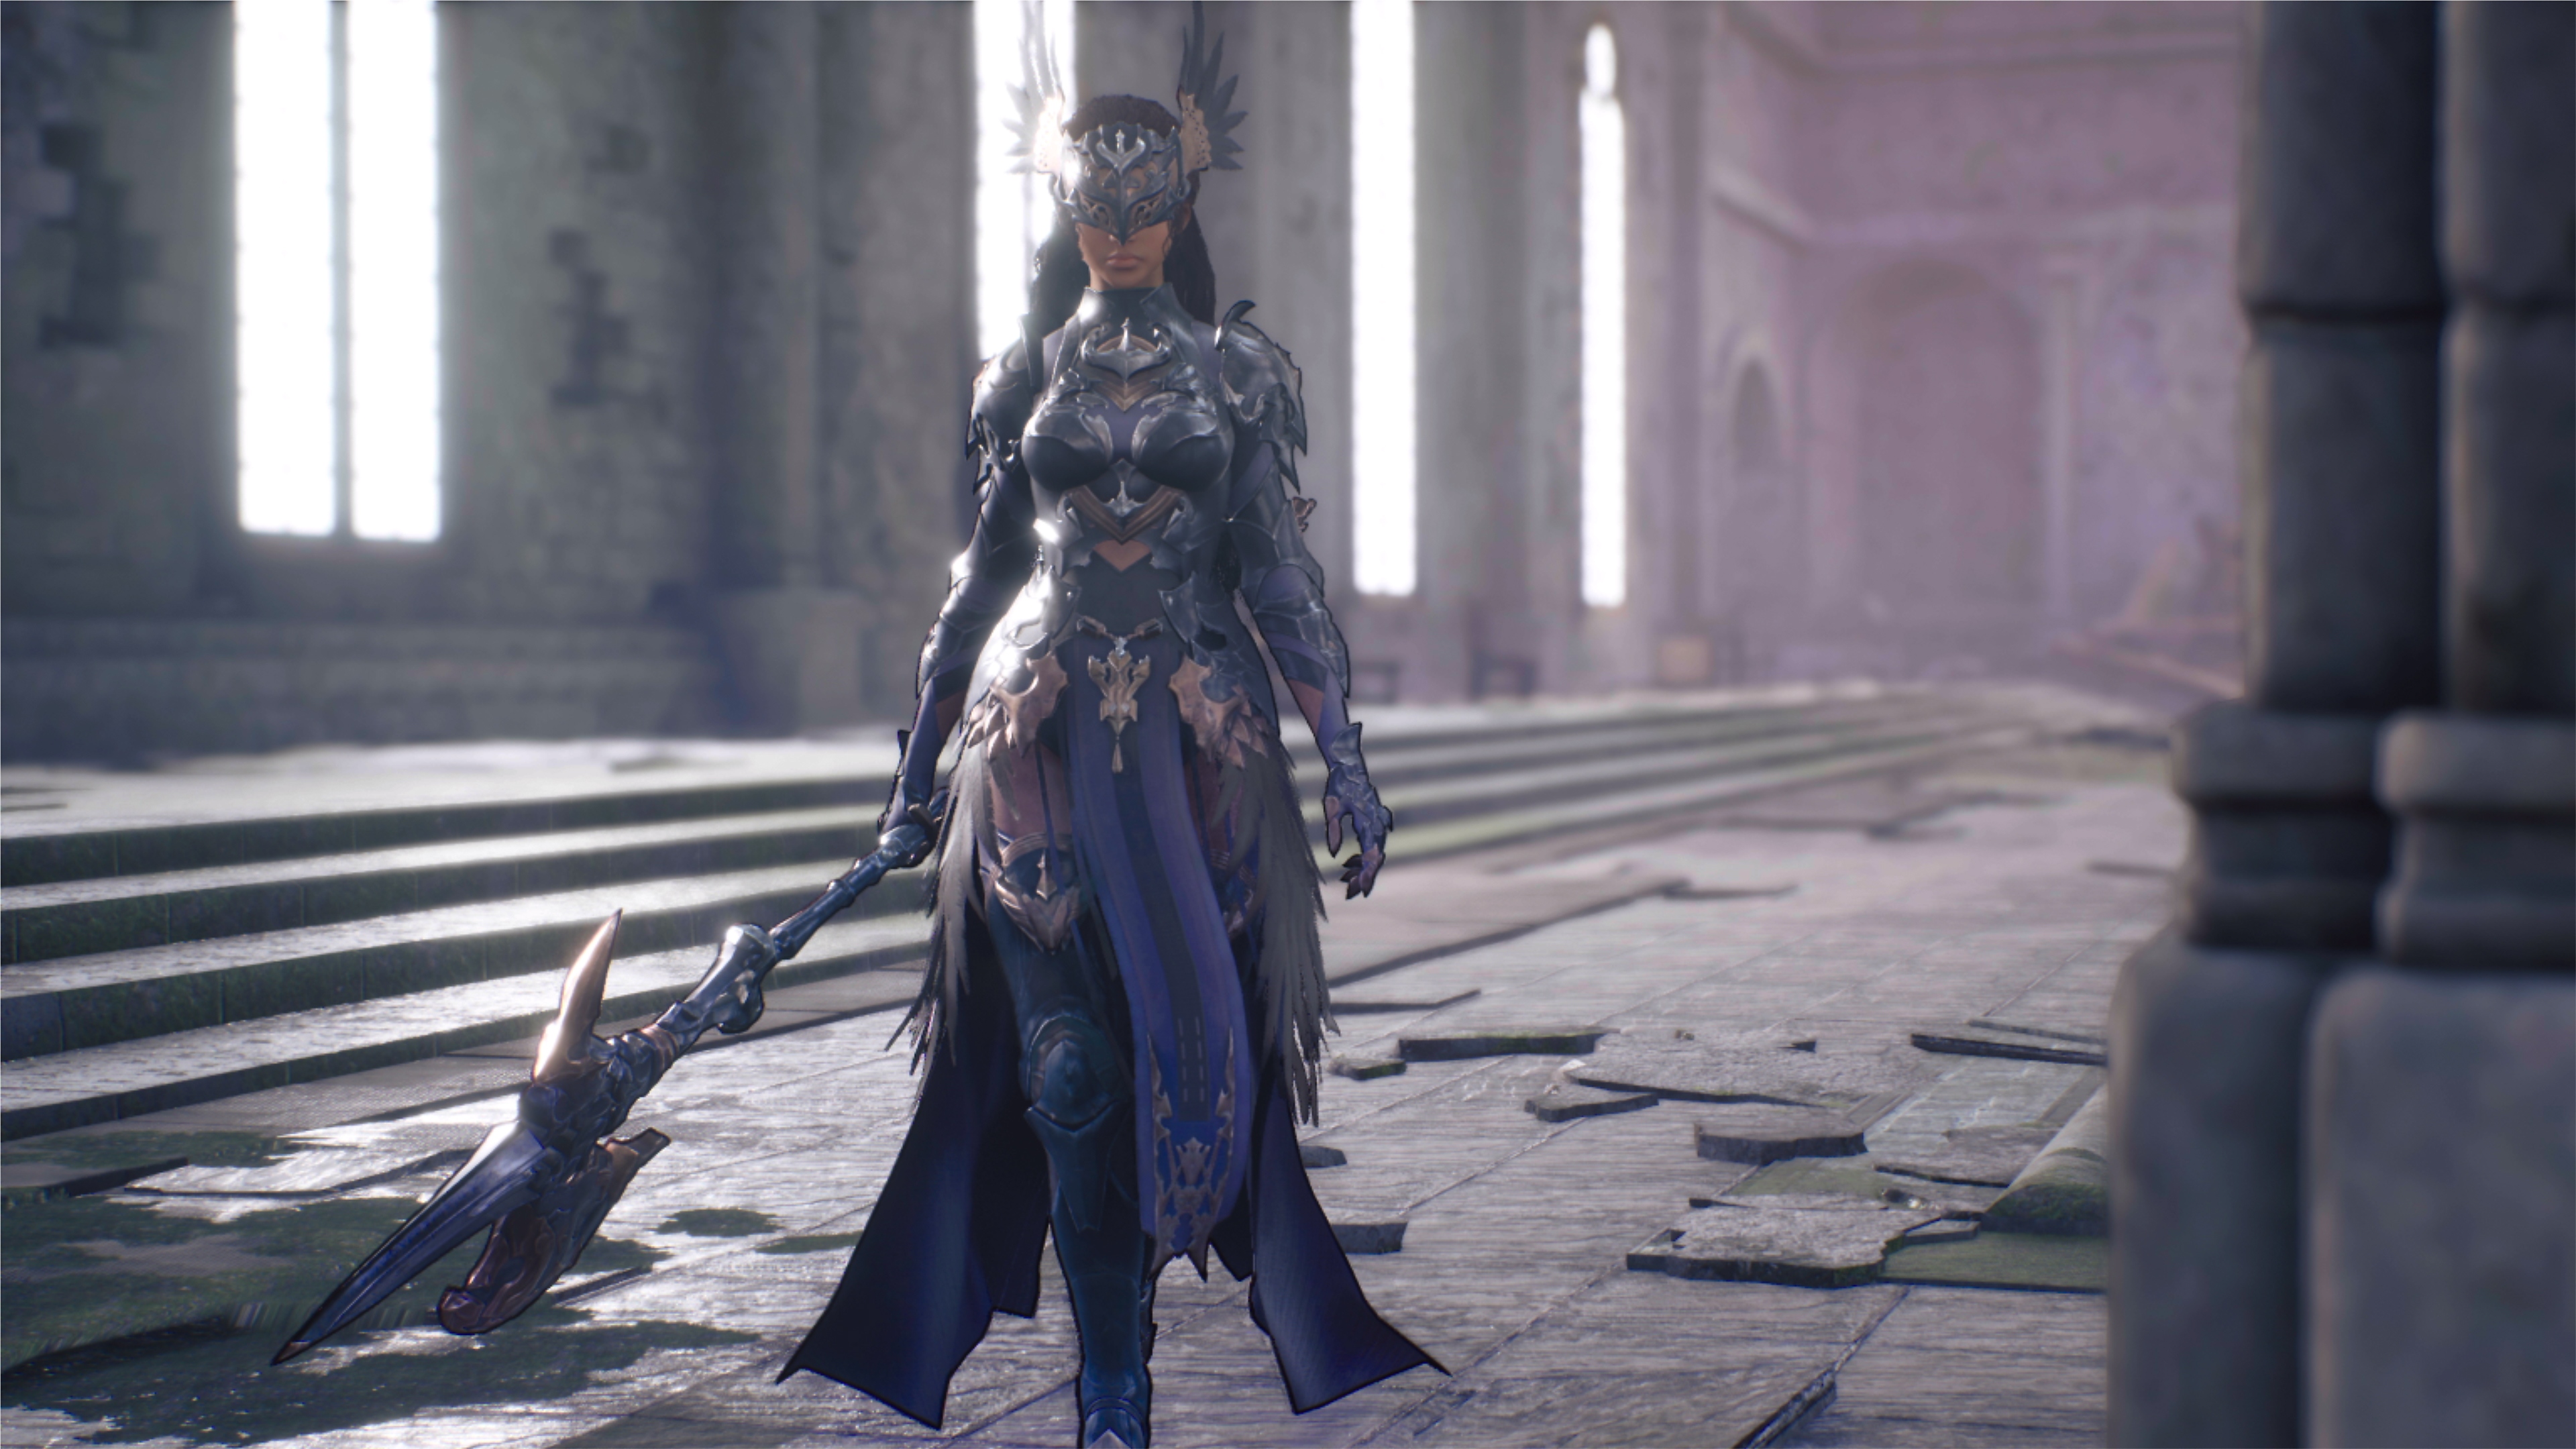 Valkyrie Elysium screenshot showing character wielding a battle-axe-like weapon